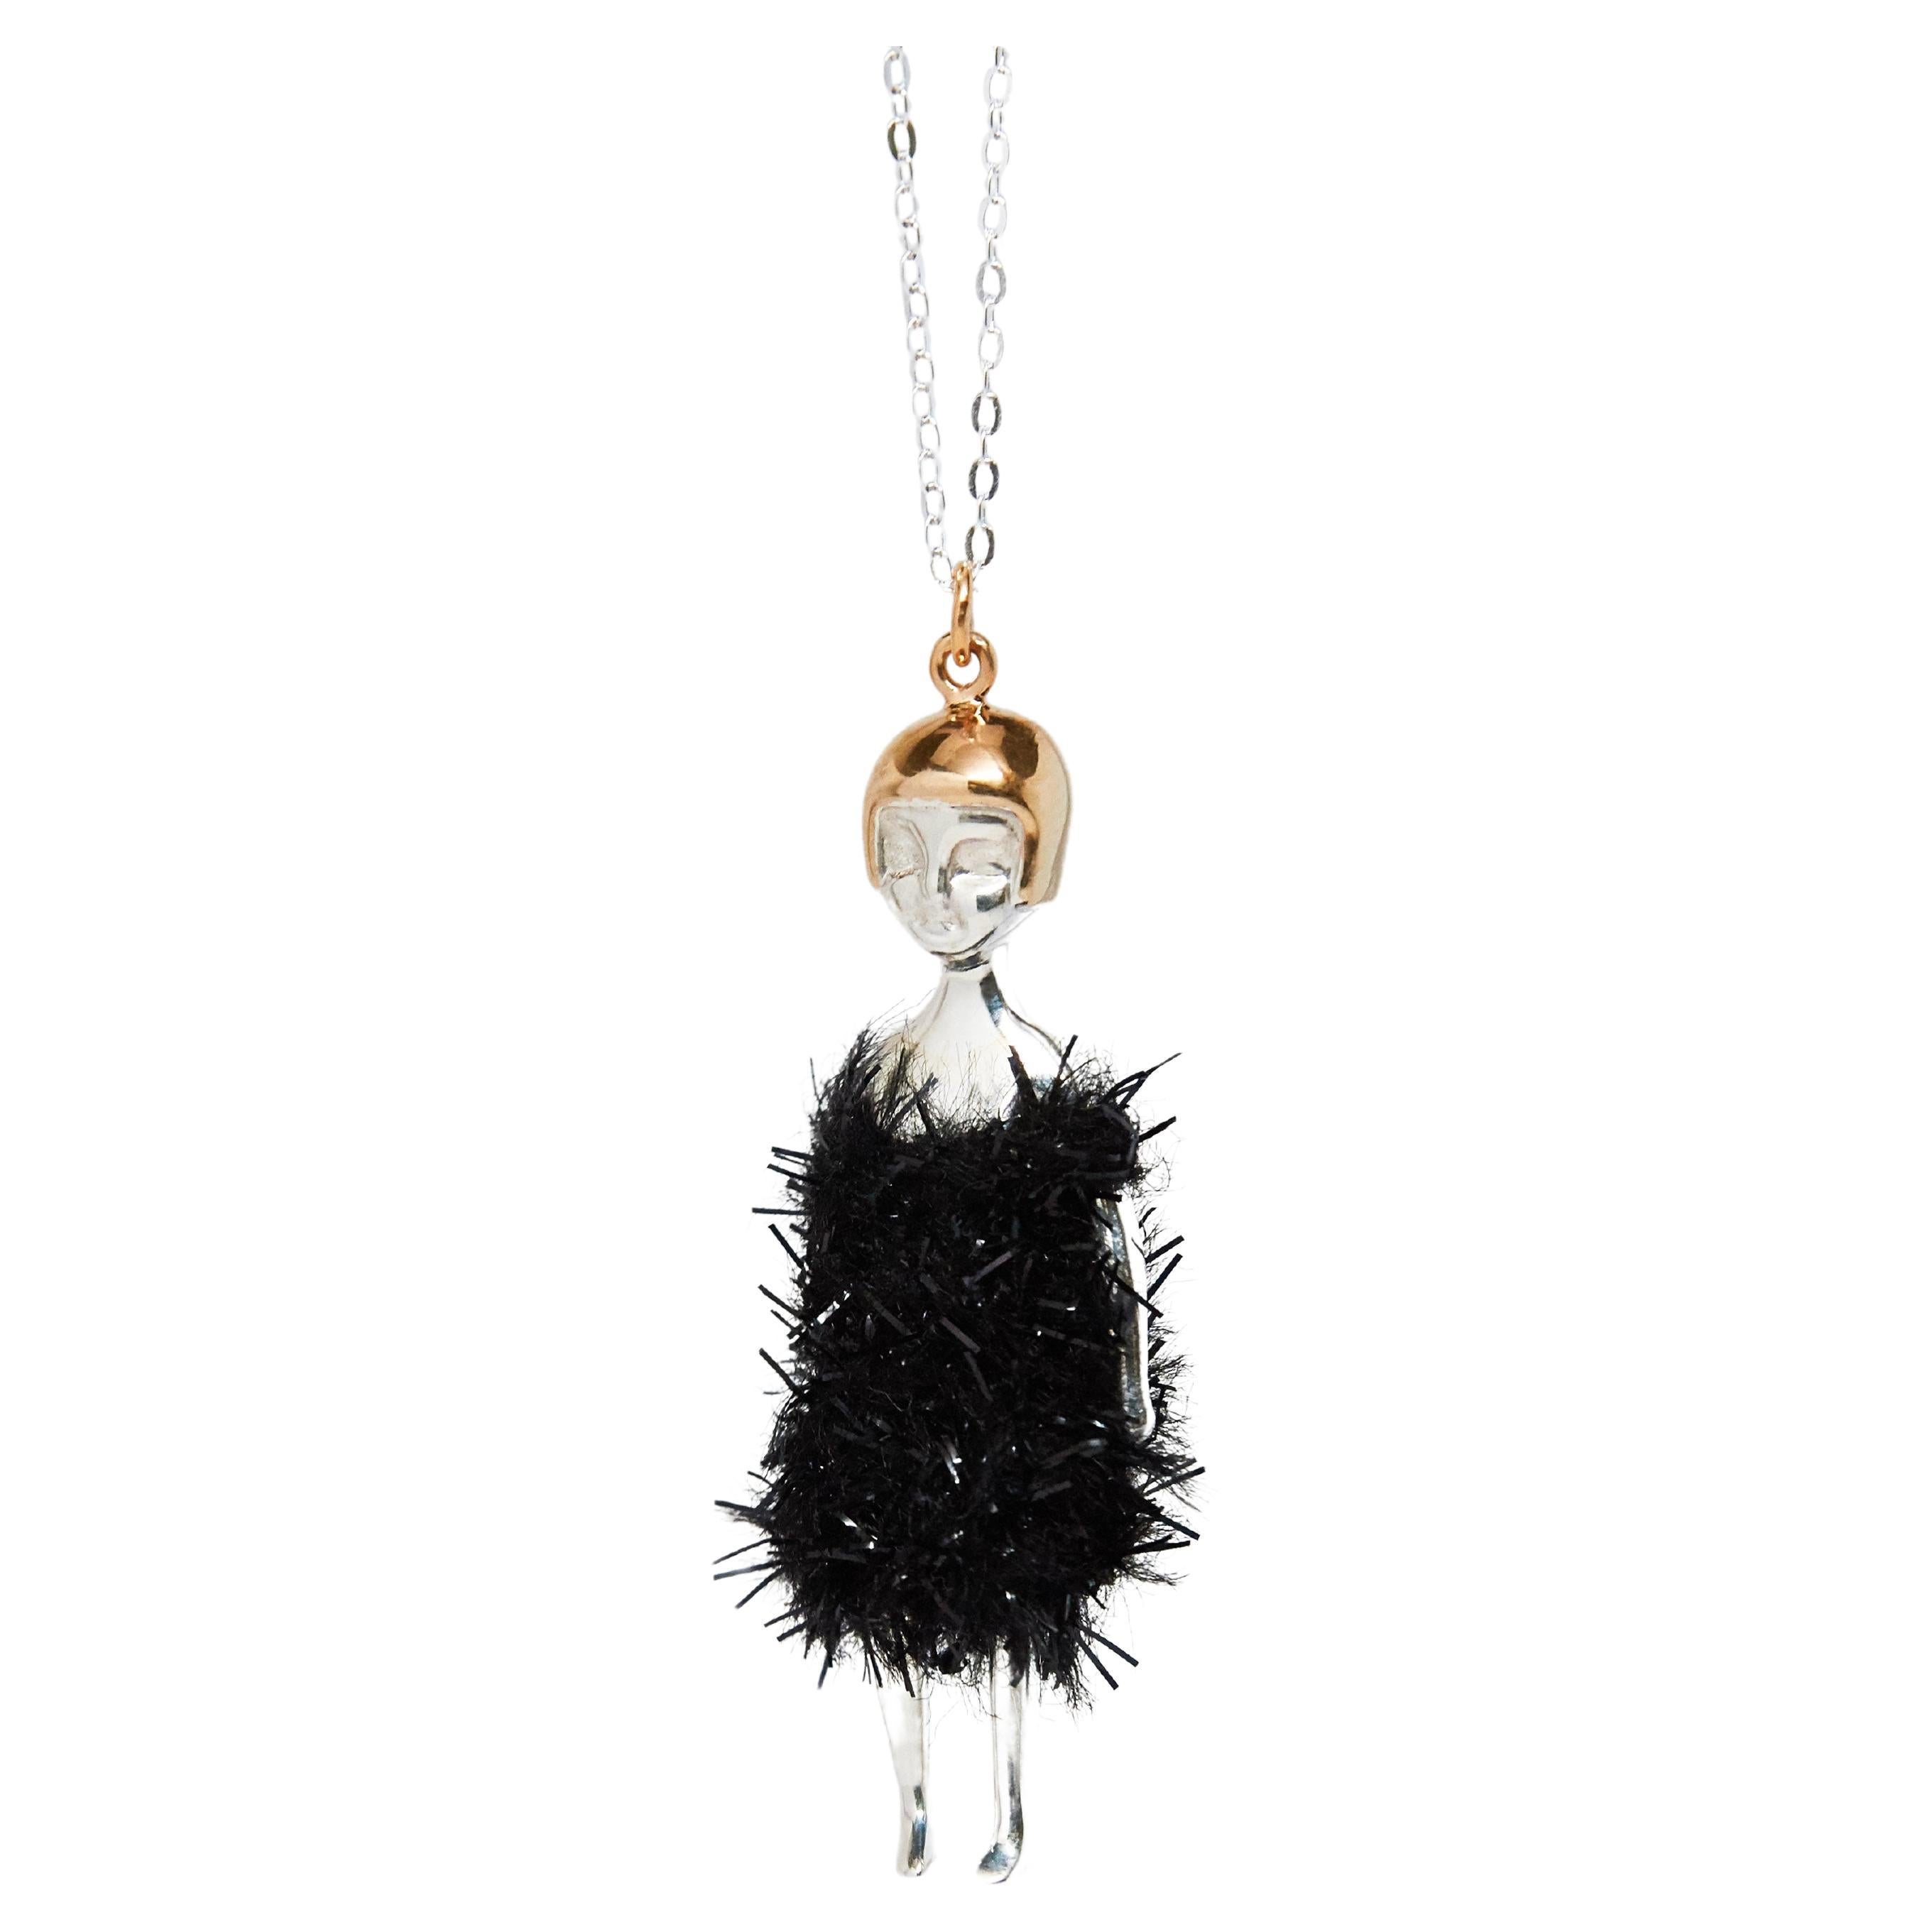 Doll Necklace with Black Faux Fur Dress